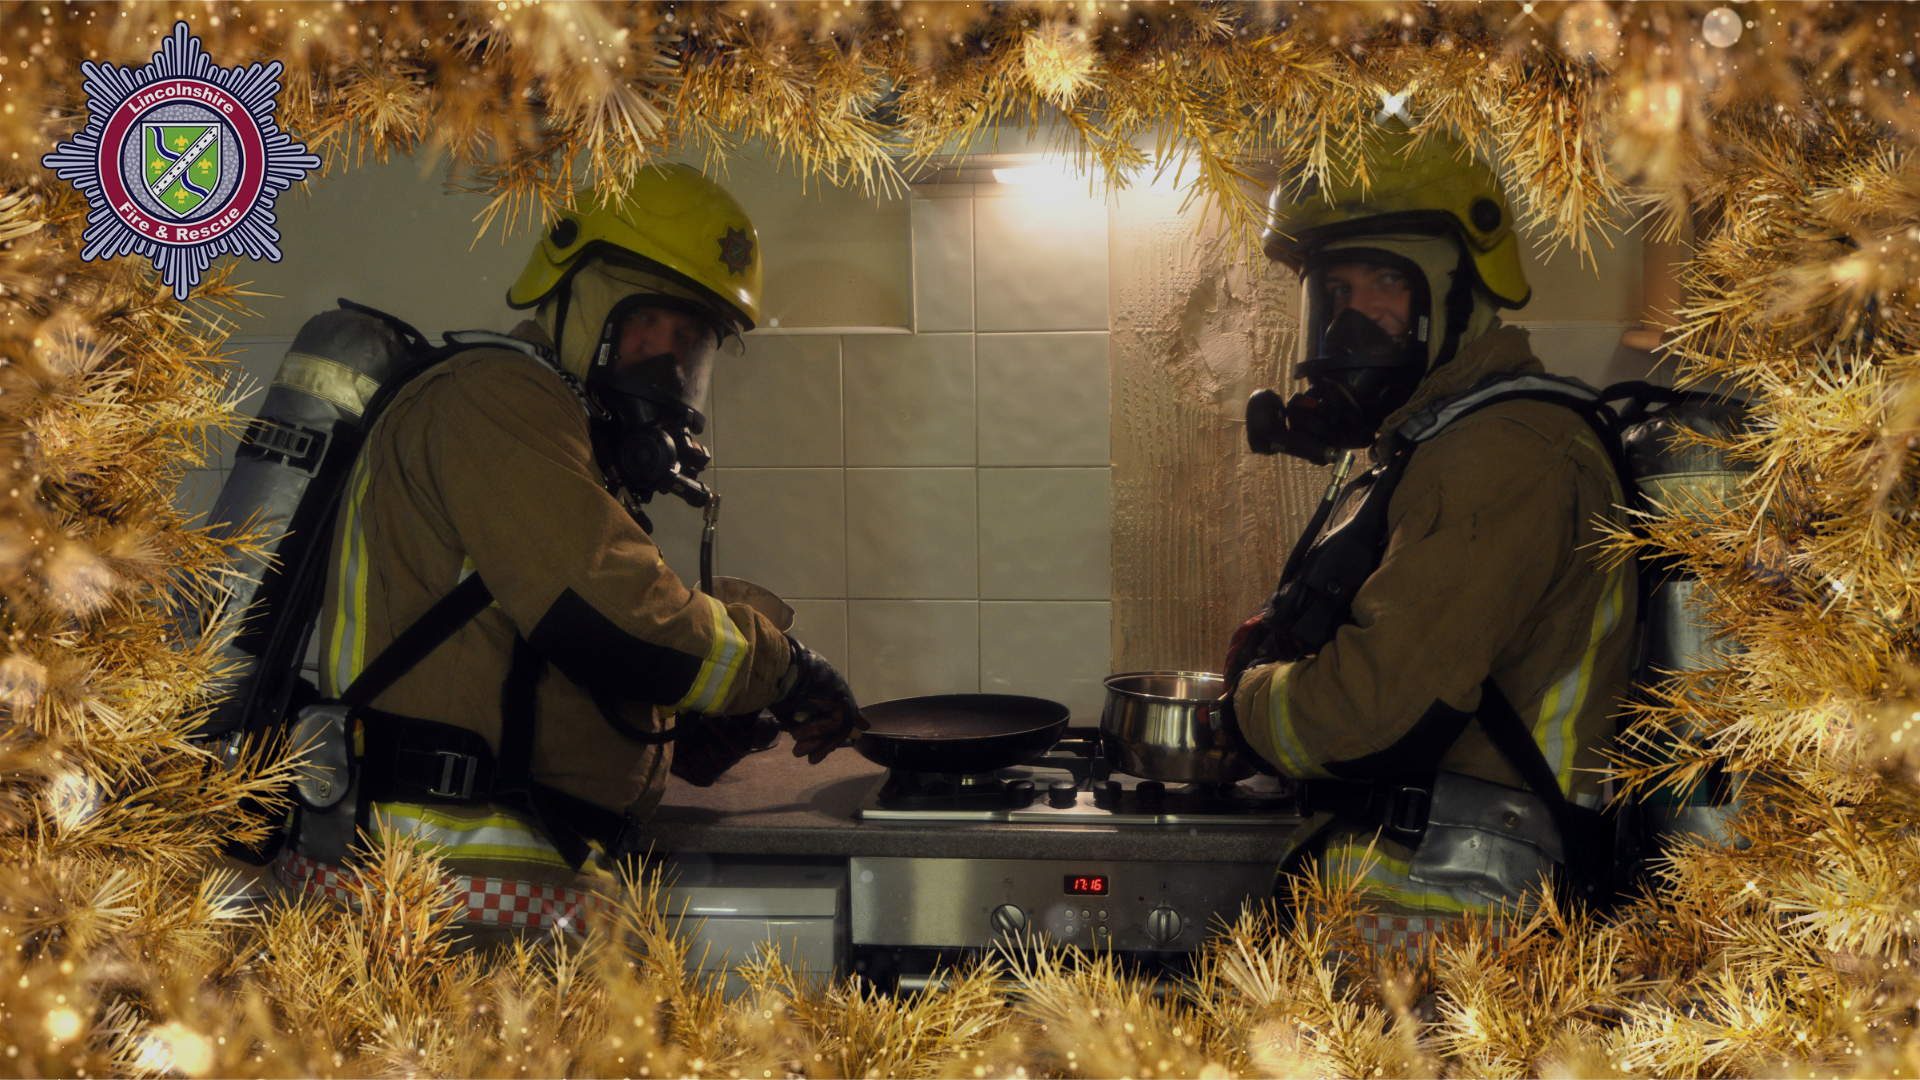 Firefighters in a kitchen